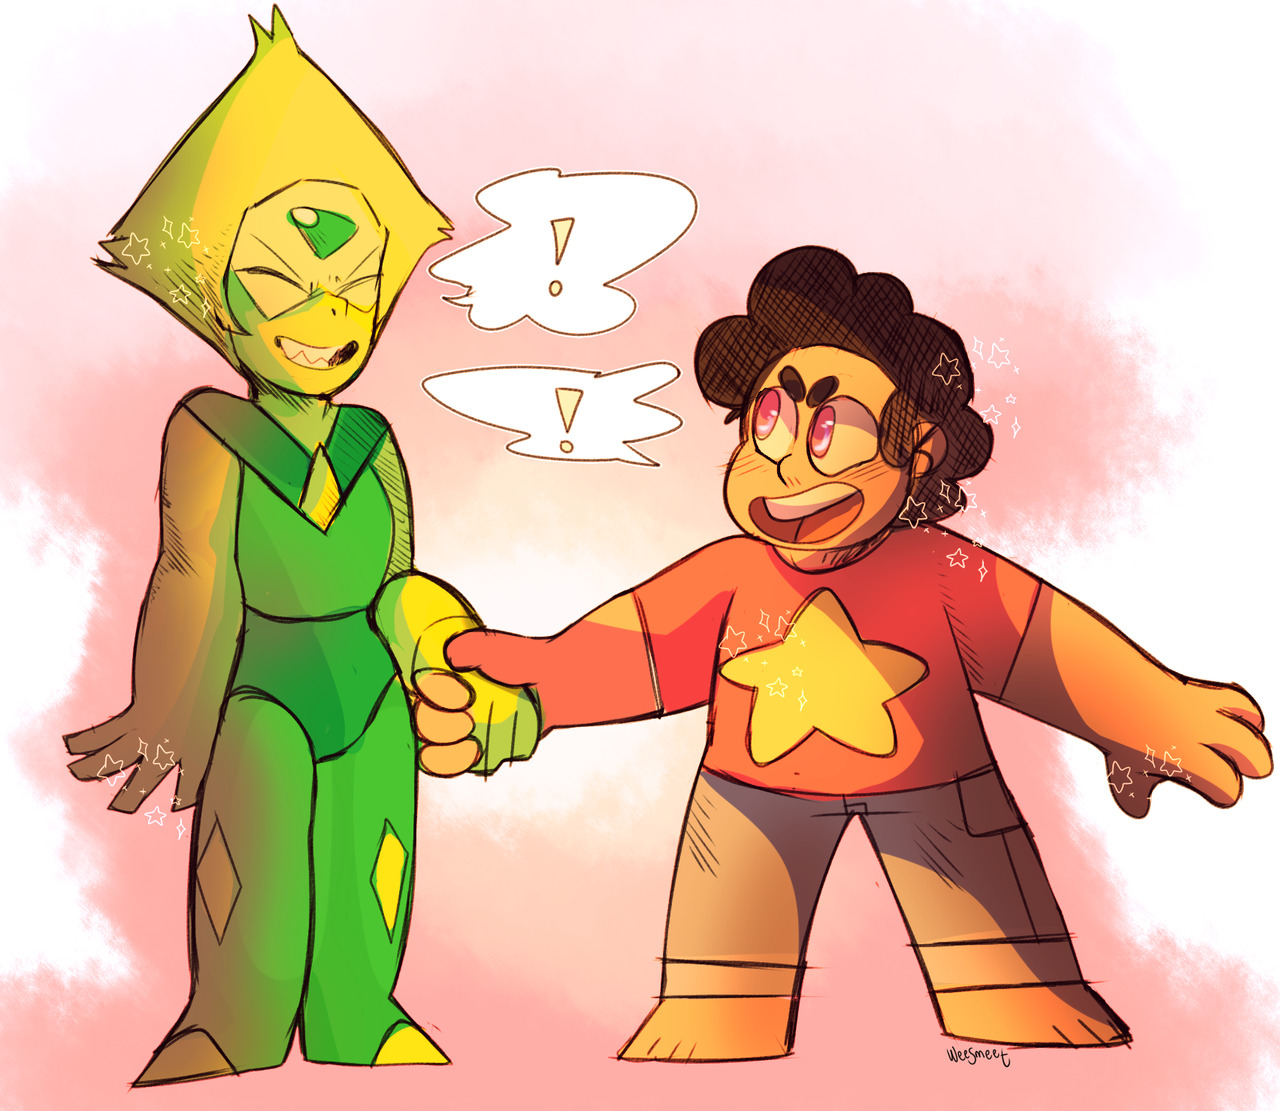 i rewatched the entirety of su and i love these two bffs